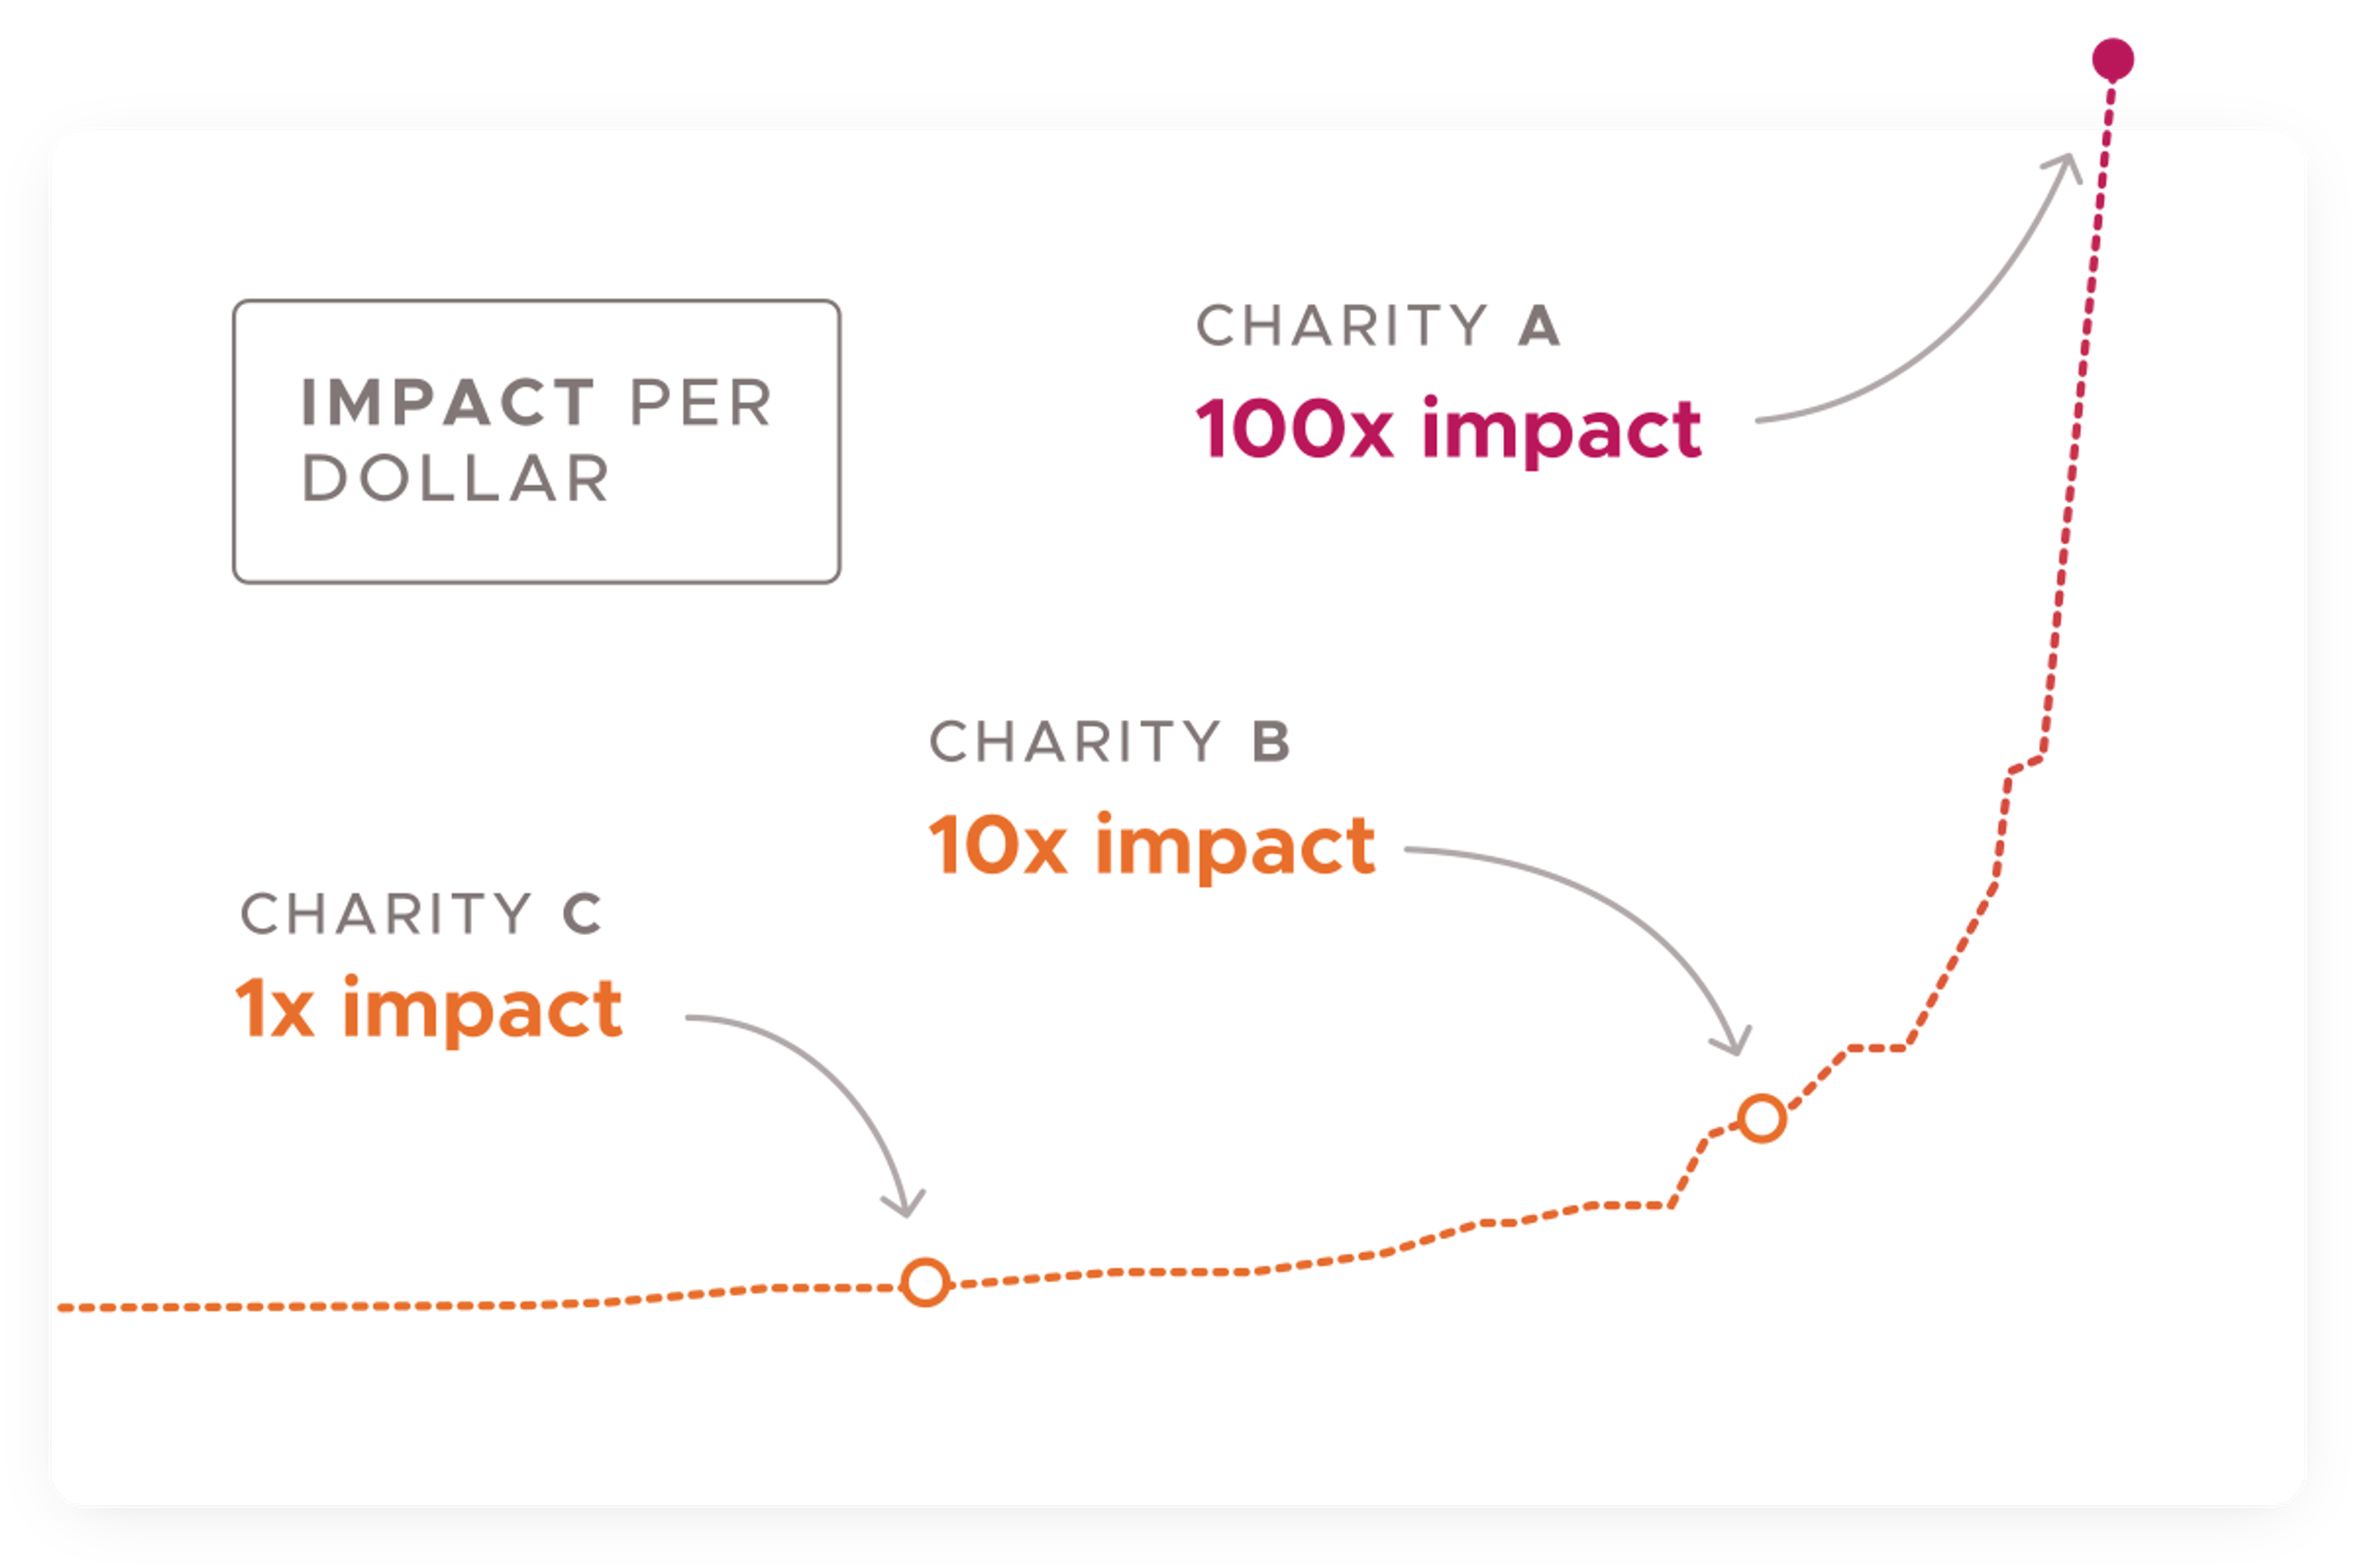 Graph of impact per dollar for different charities